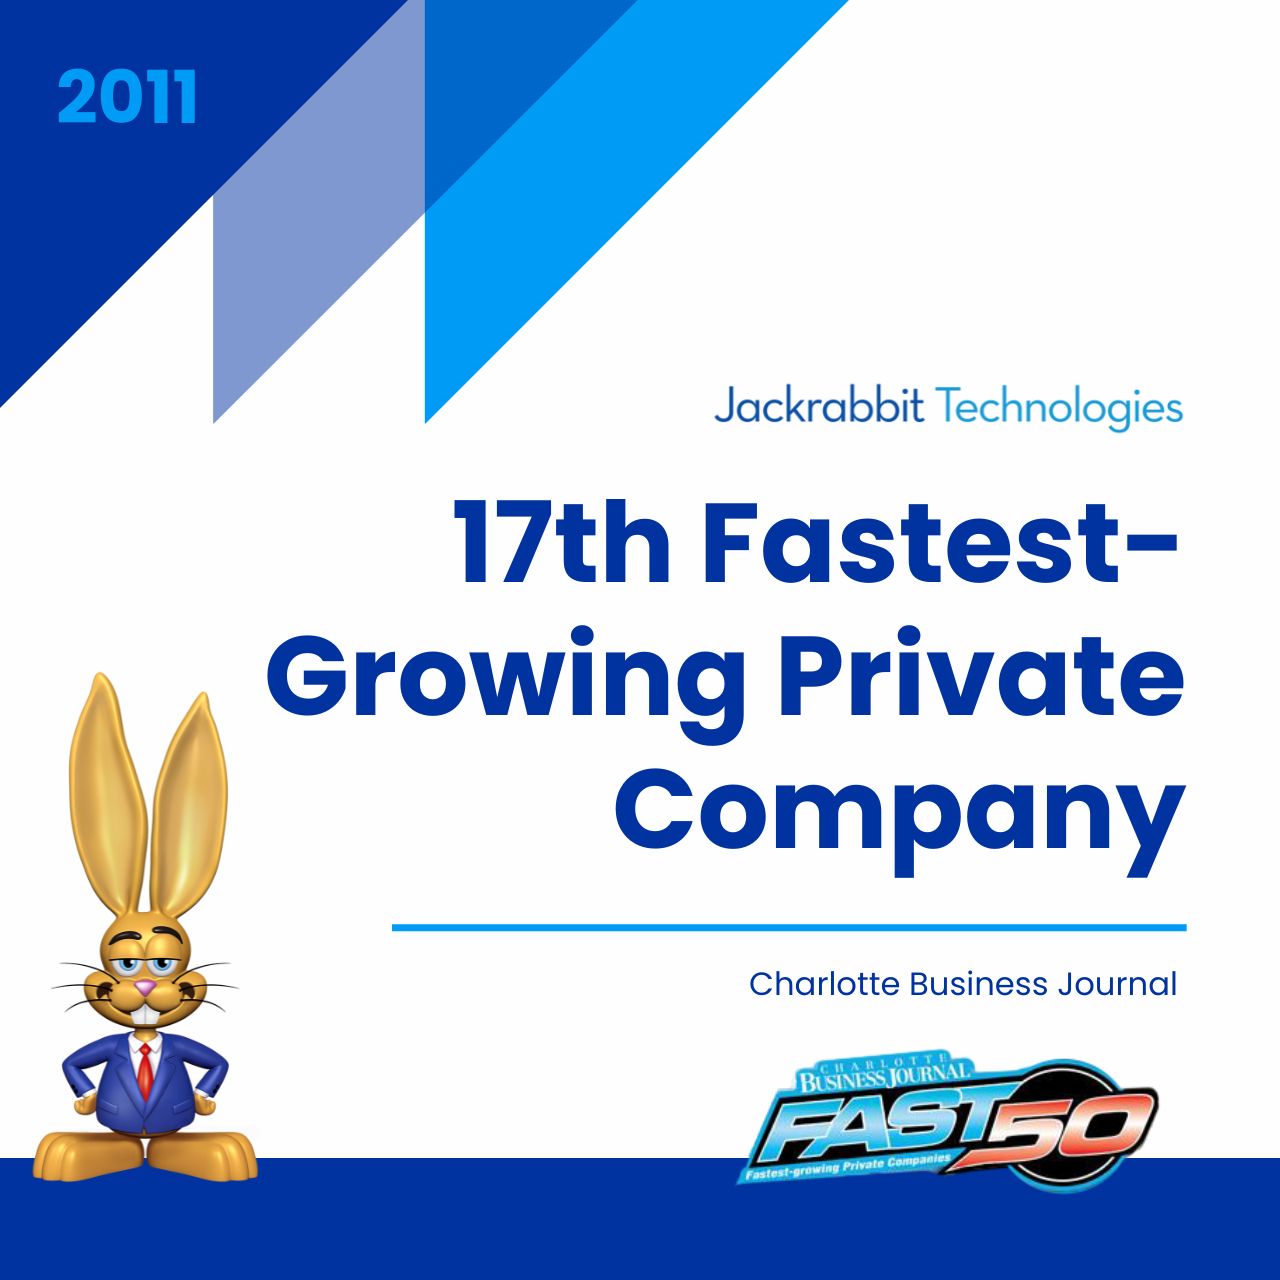 jackrabbit 17th fastest growing private company